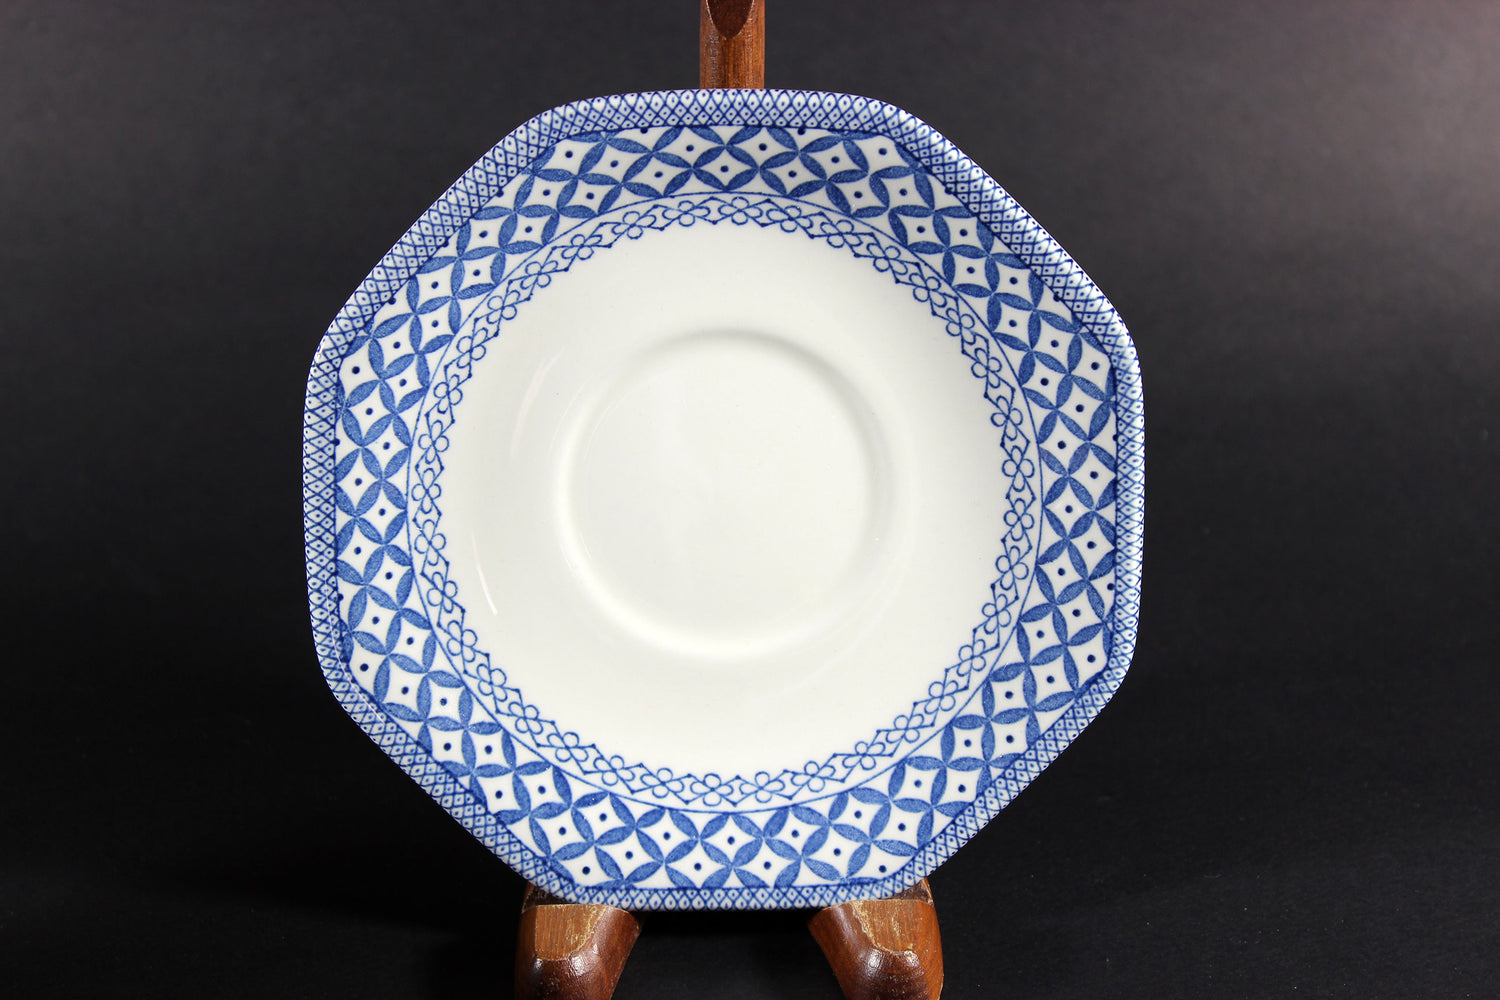 Blue Willow, Saucer, Meakin, Staffordshire